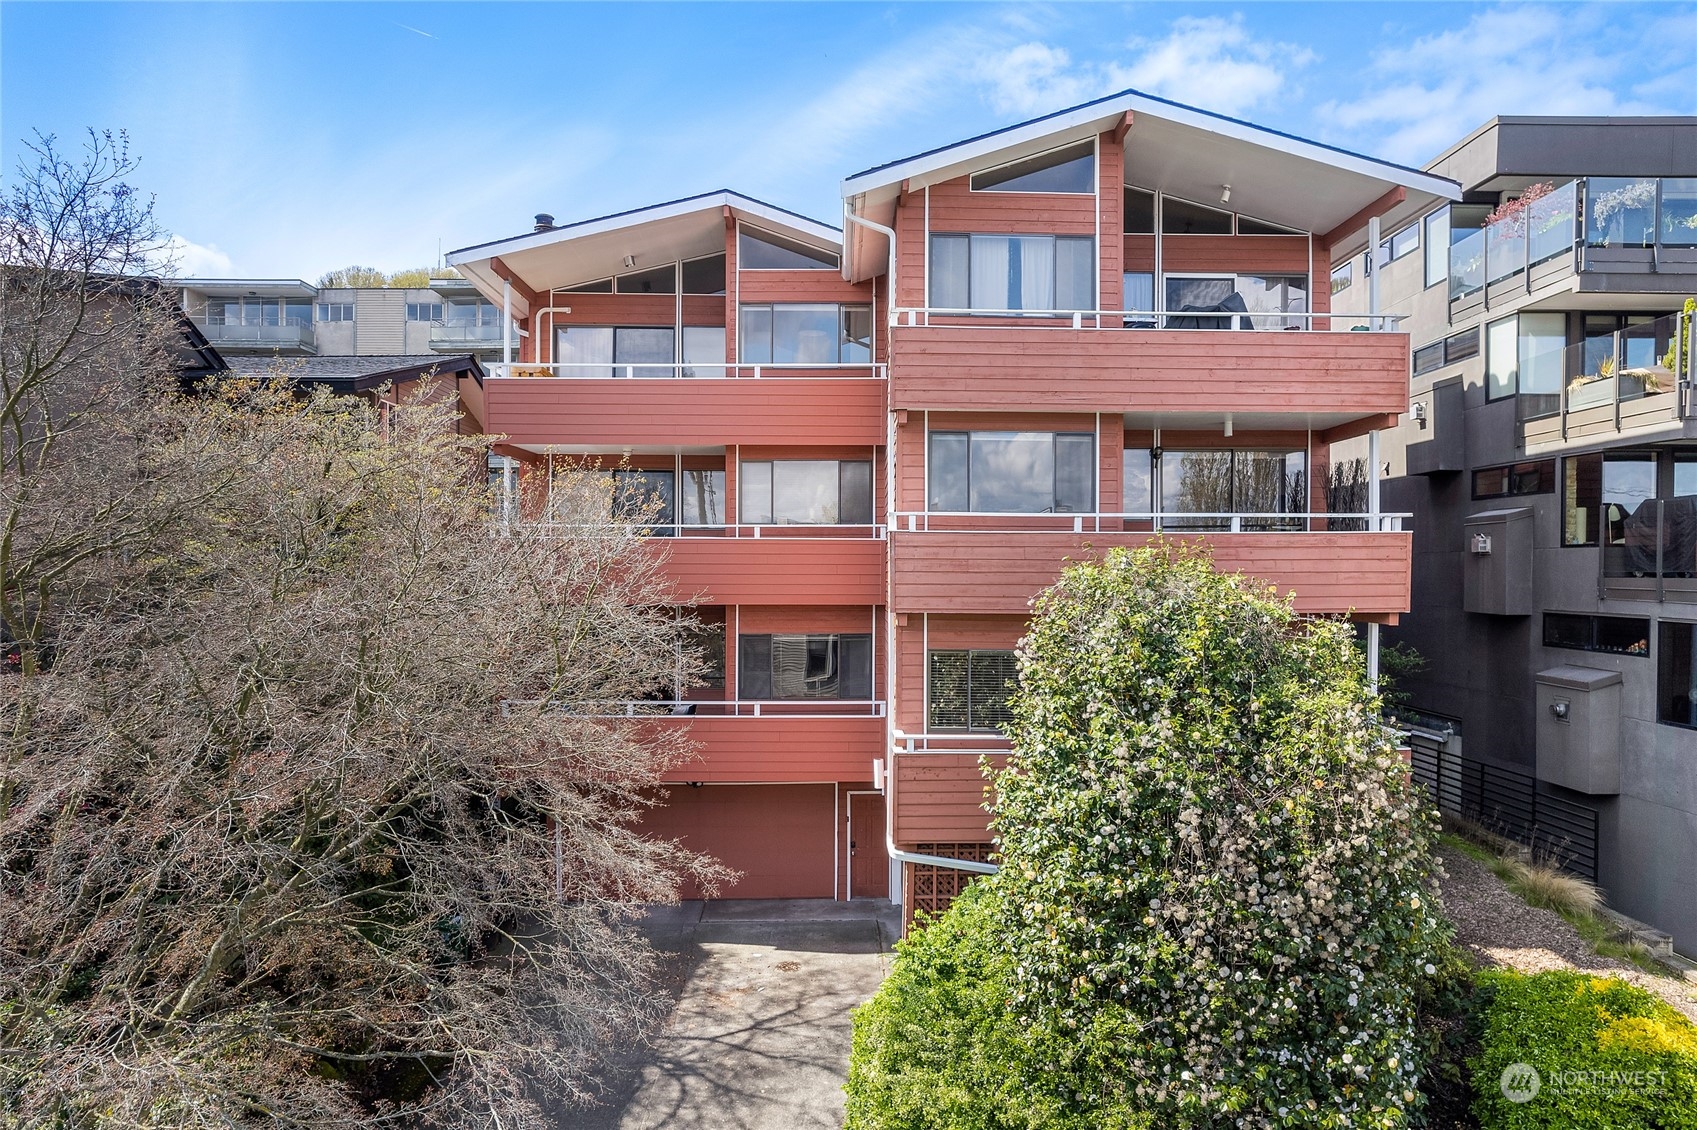 2028 Waverly Place N Unit 101, Seattle, Washington, 98109, United States, 2 Bedrooms Bedrooms, ,1 BathroomBathrooms,Residential,For Sale,2028 Waverly Place N Unit 101,1499931